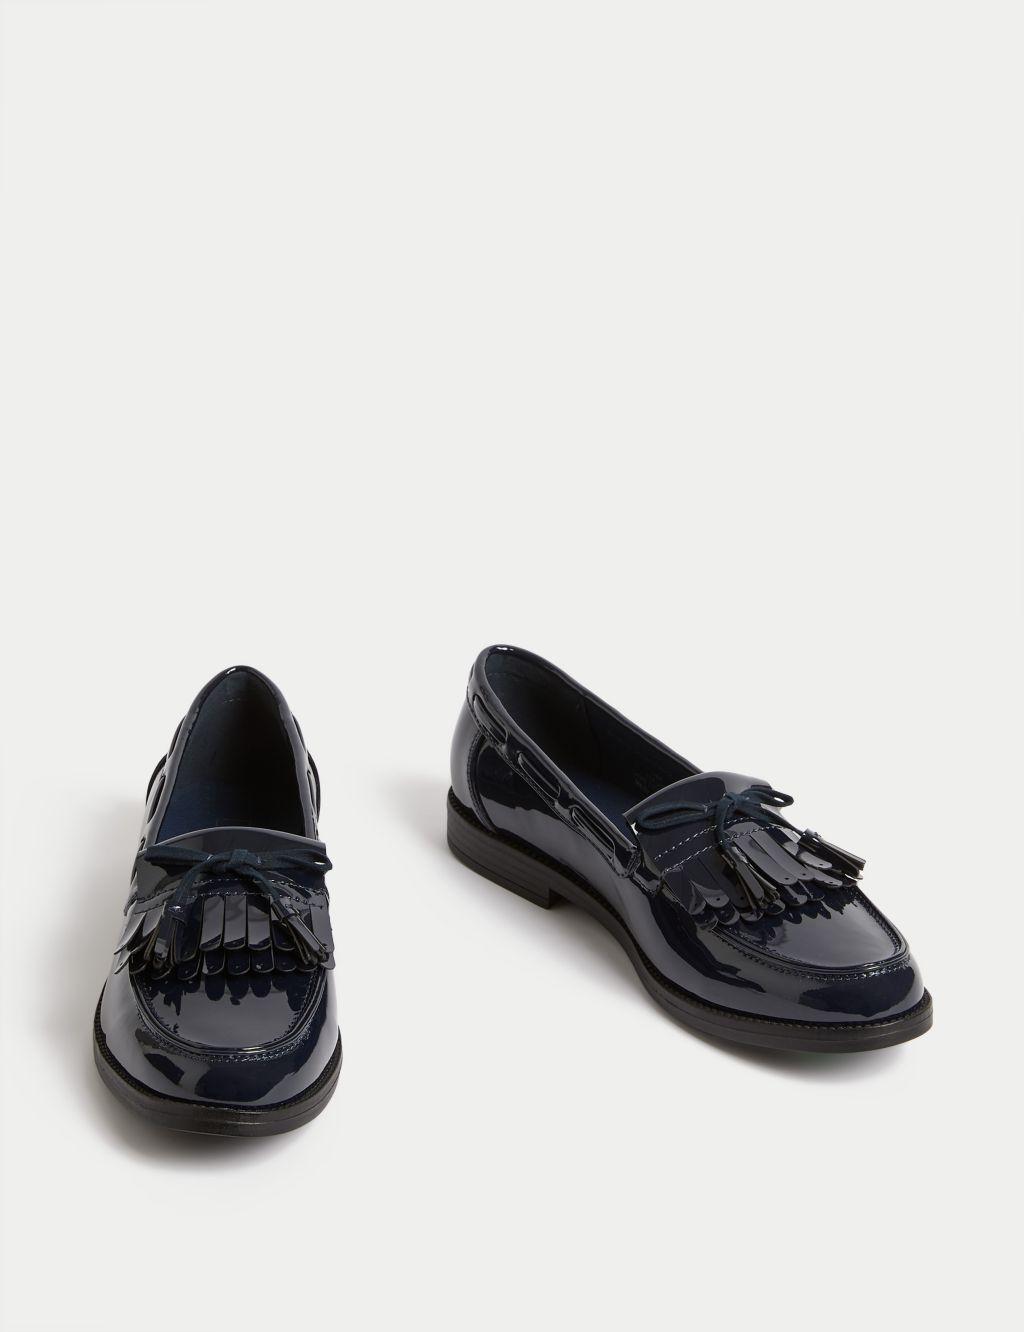 Patent Tassel Bow Loafers image 2